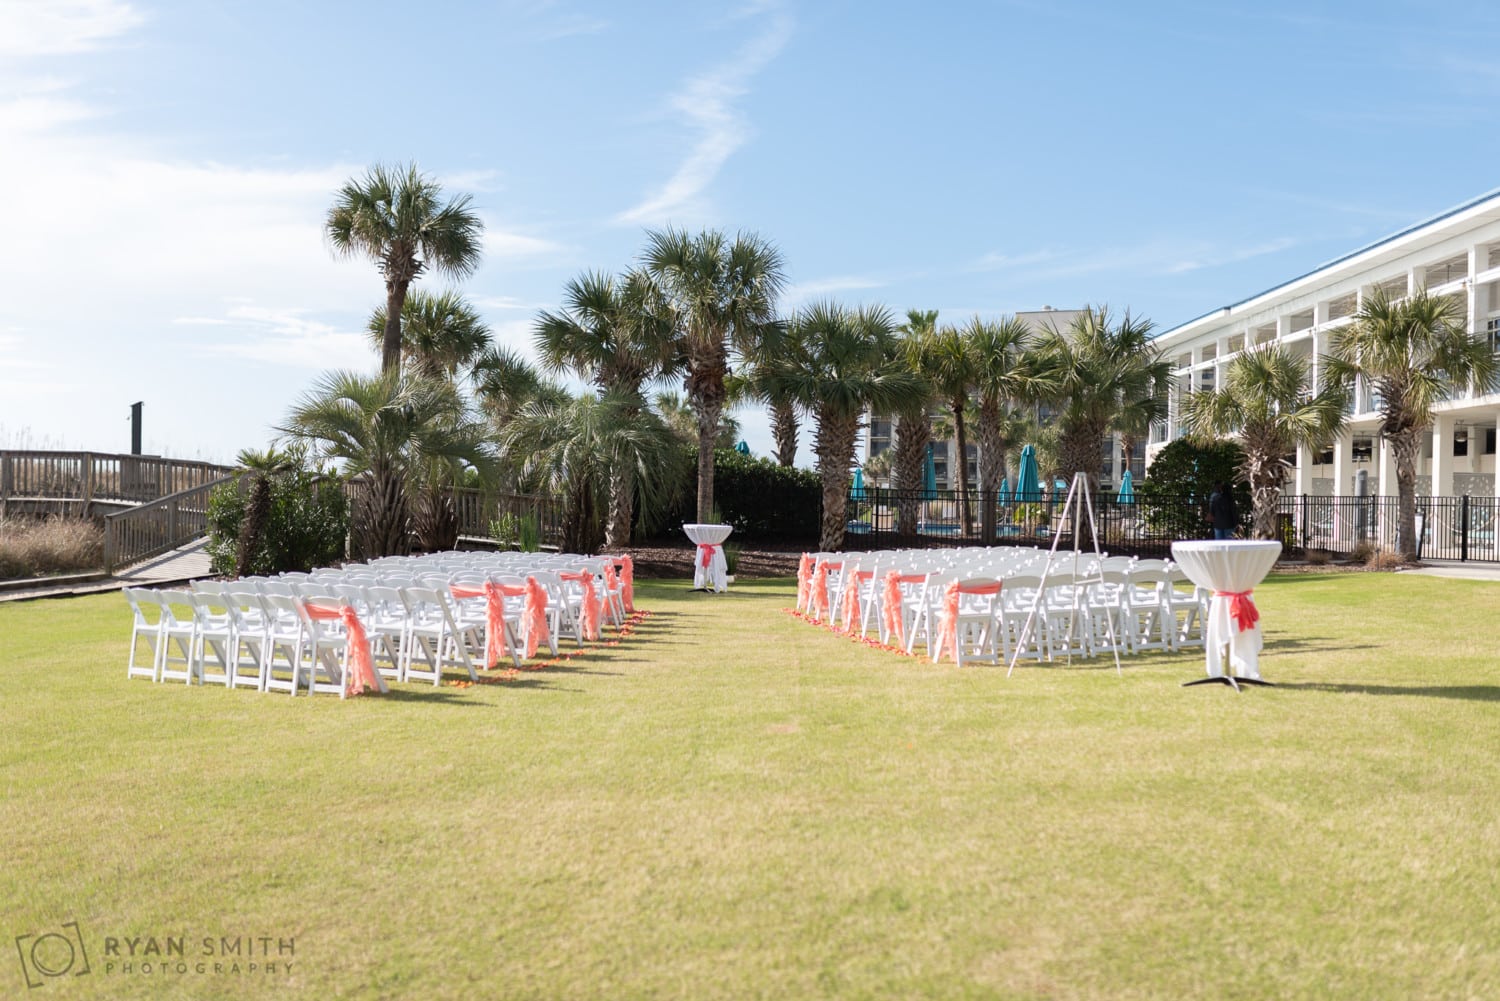 Ceremony decorations on lawn - Doubletree Resort - Myrtle Beach